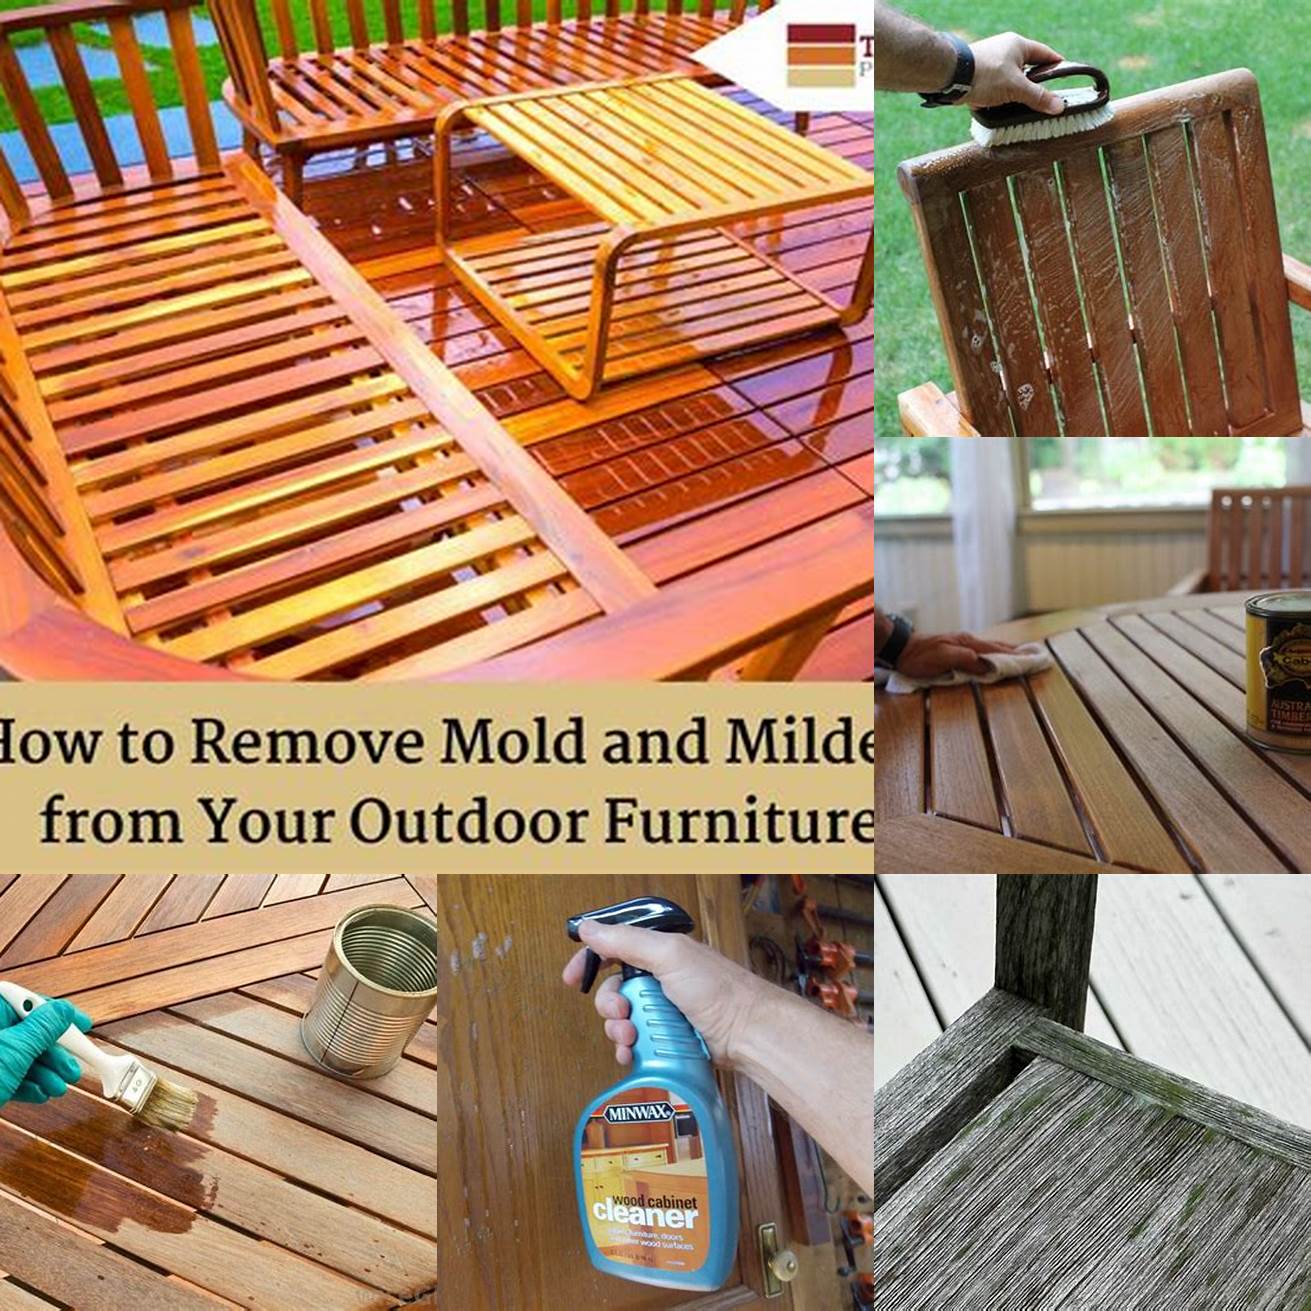 Removing mildew and mold from teak furniture